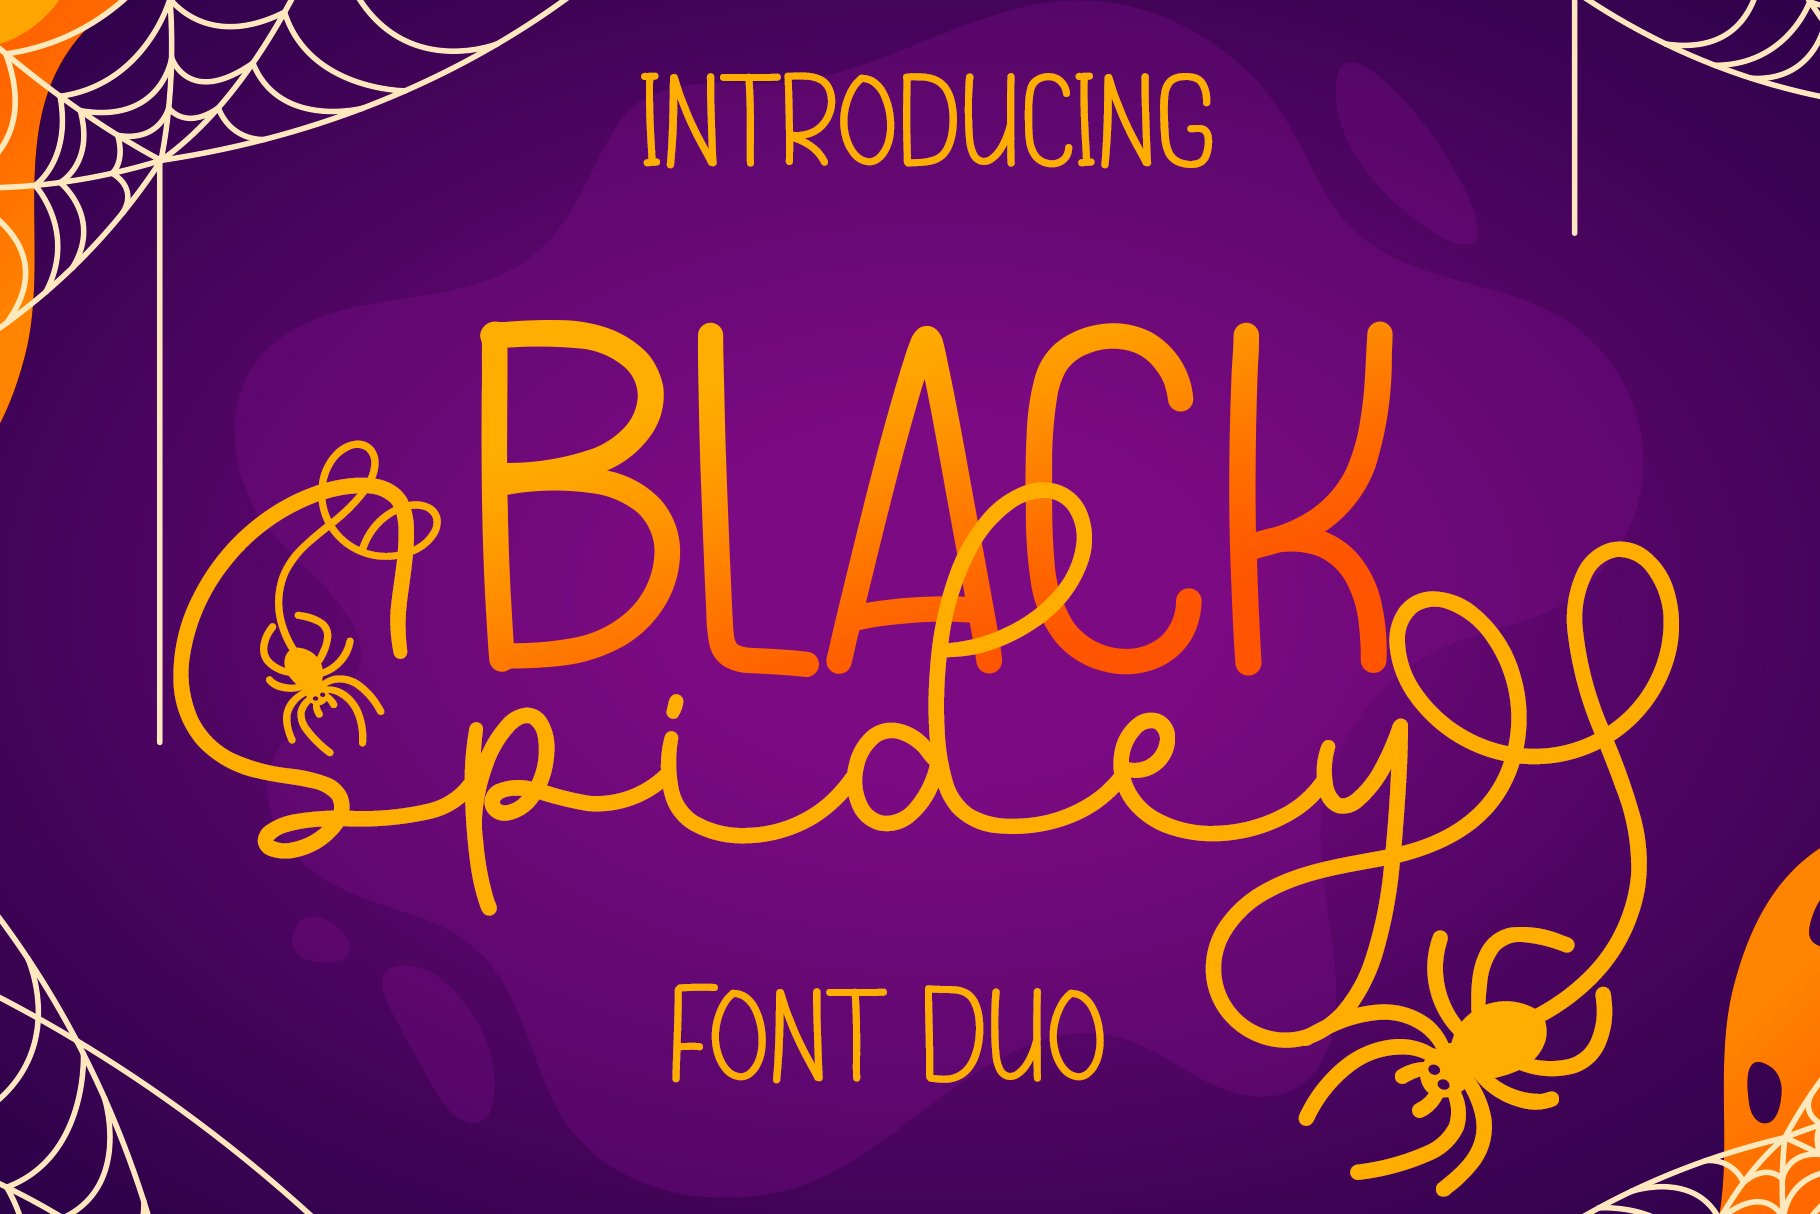 Black Spidey | Halloween Font cover image.